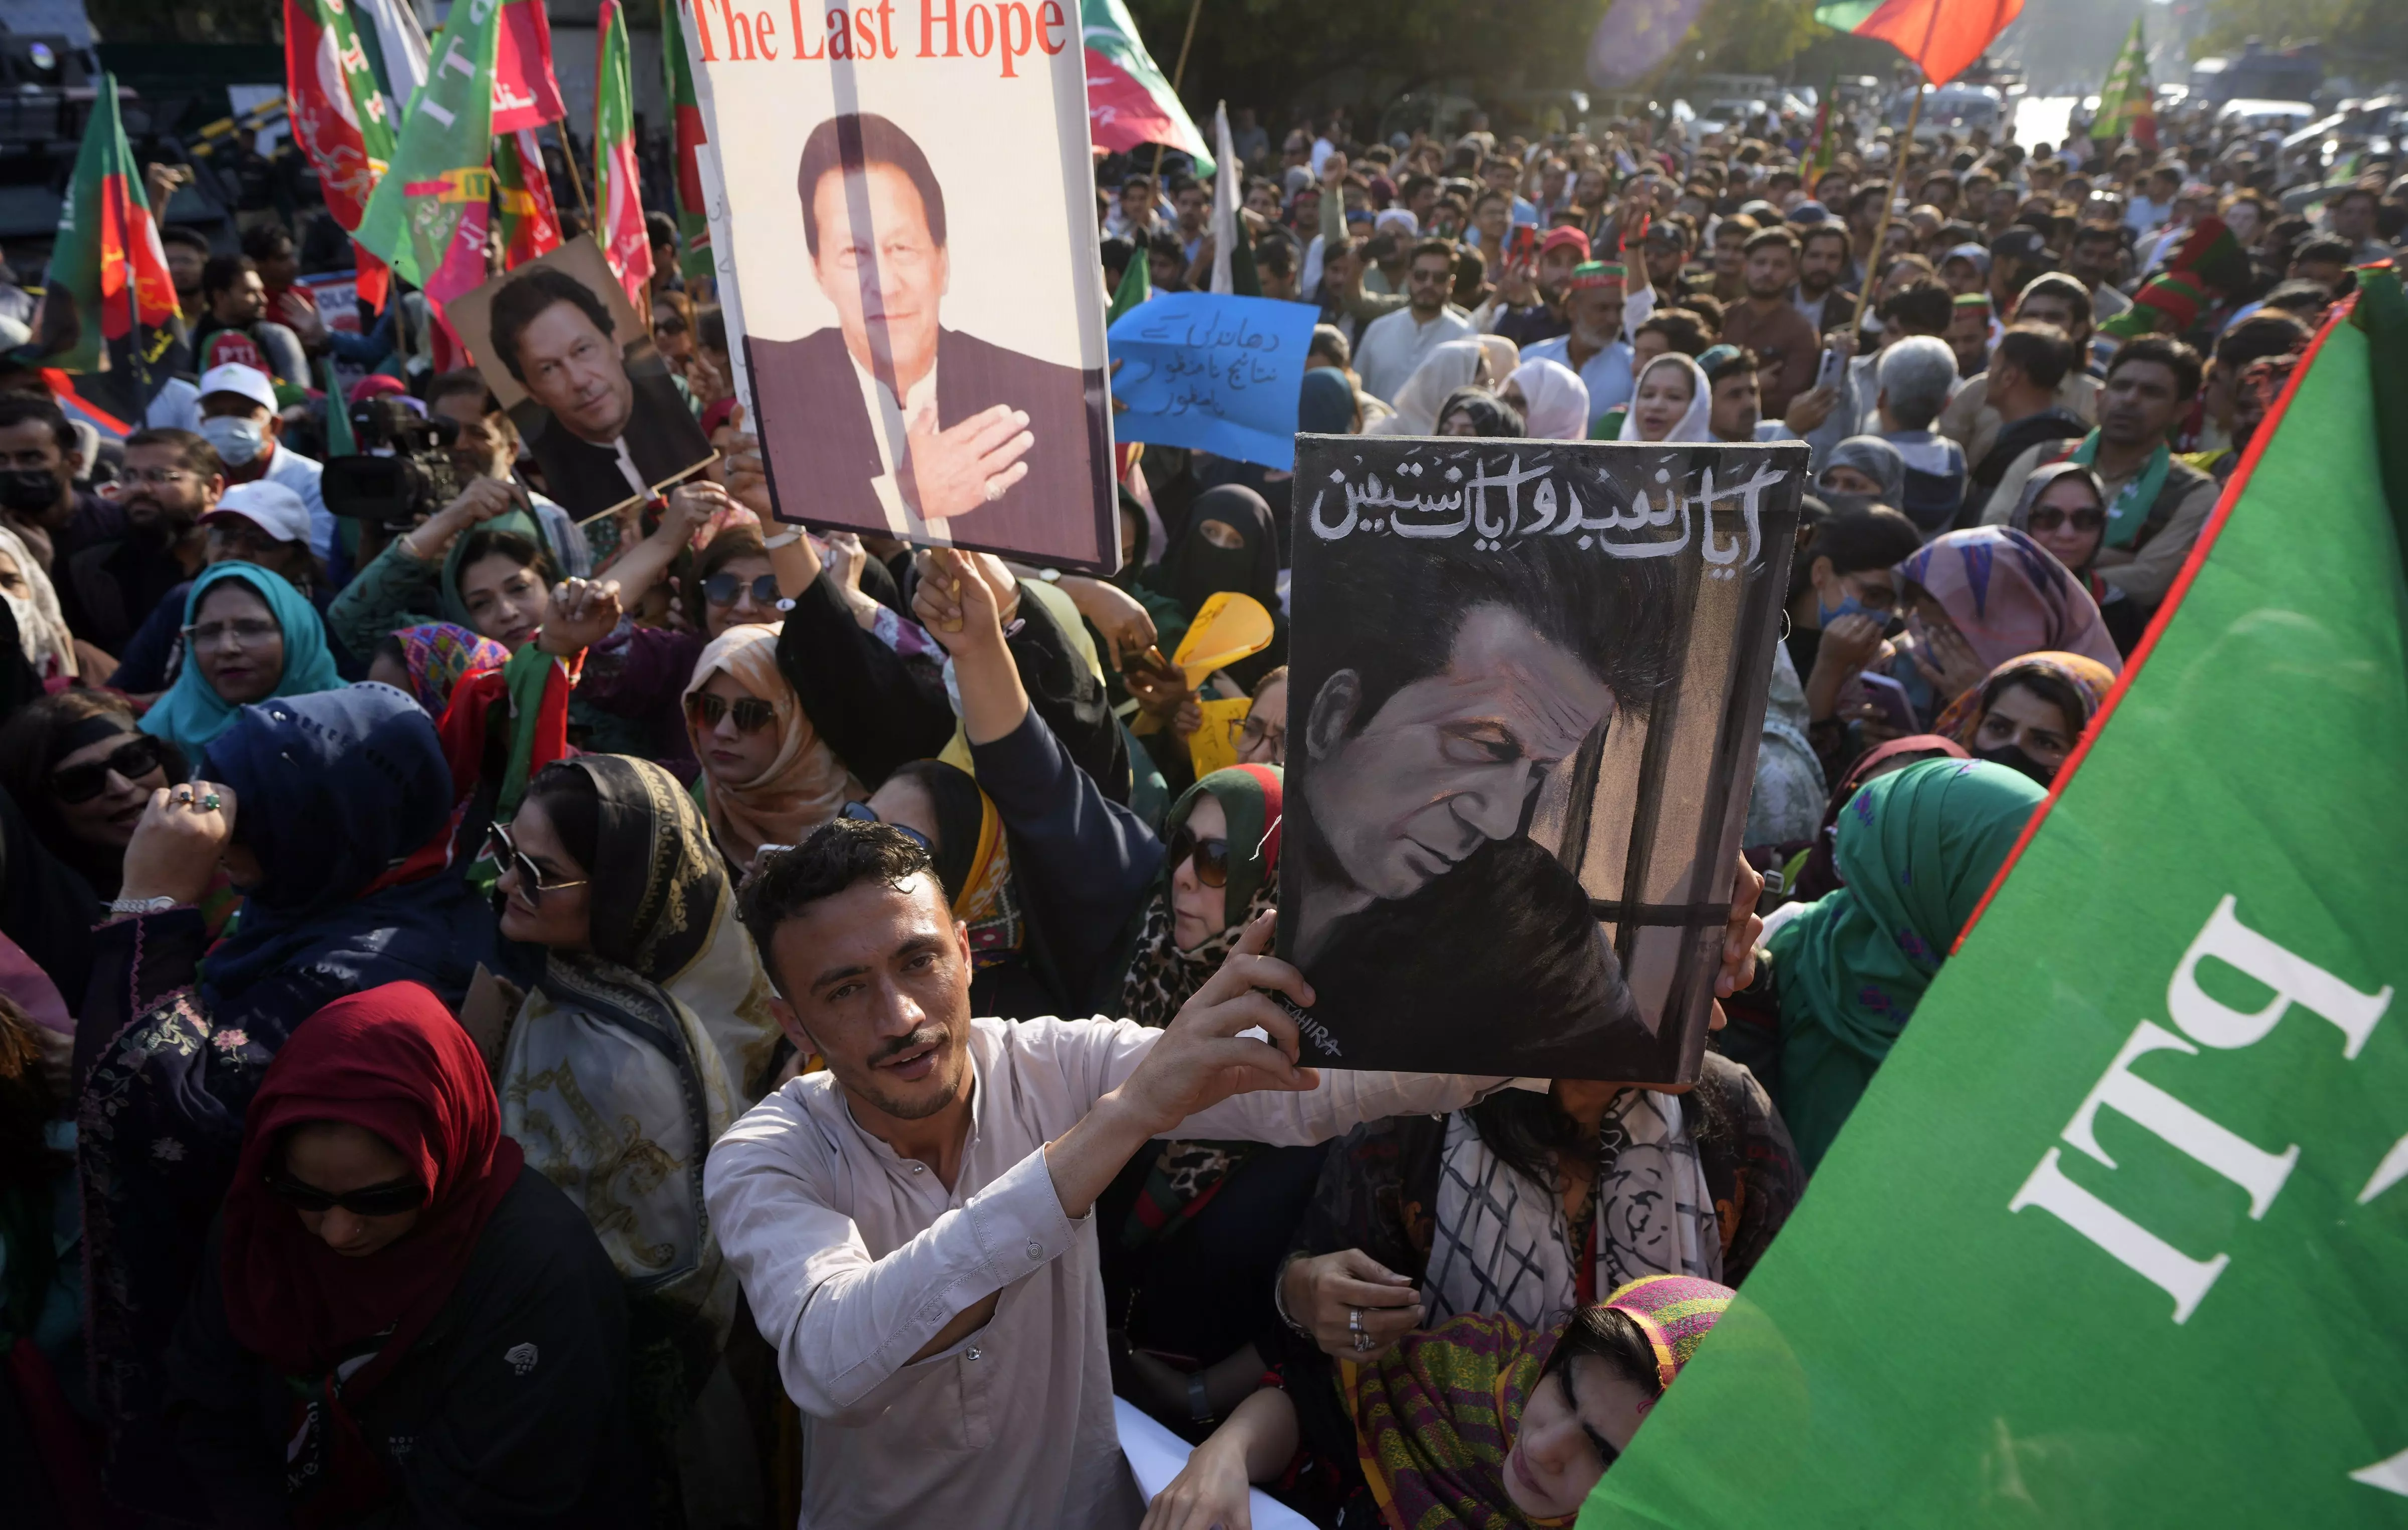 Imran Khan’s party takes steps to form government in Pakistan